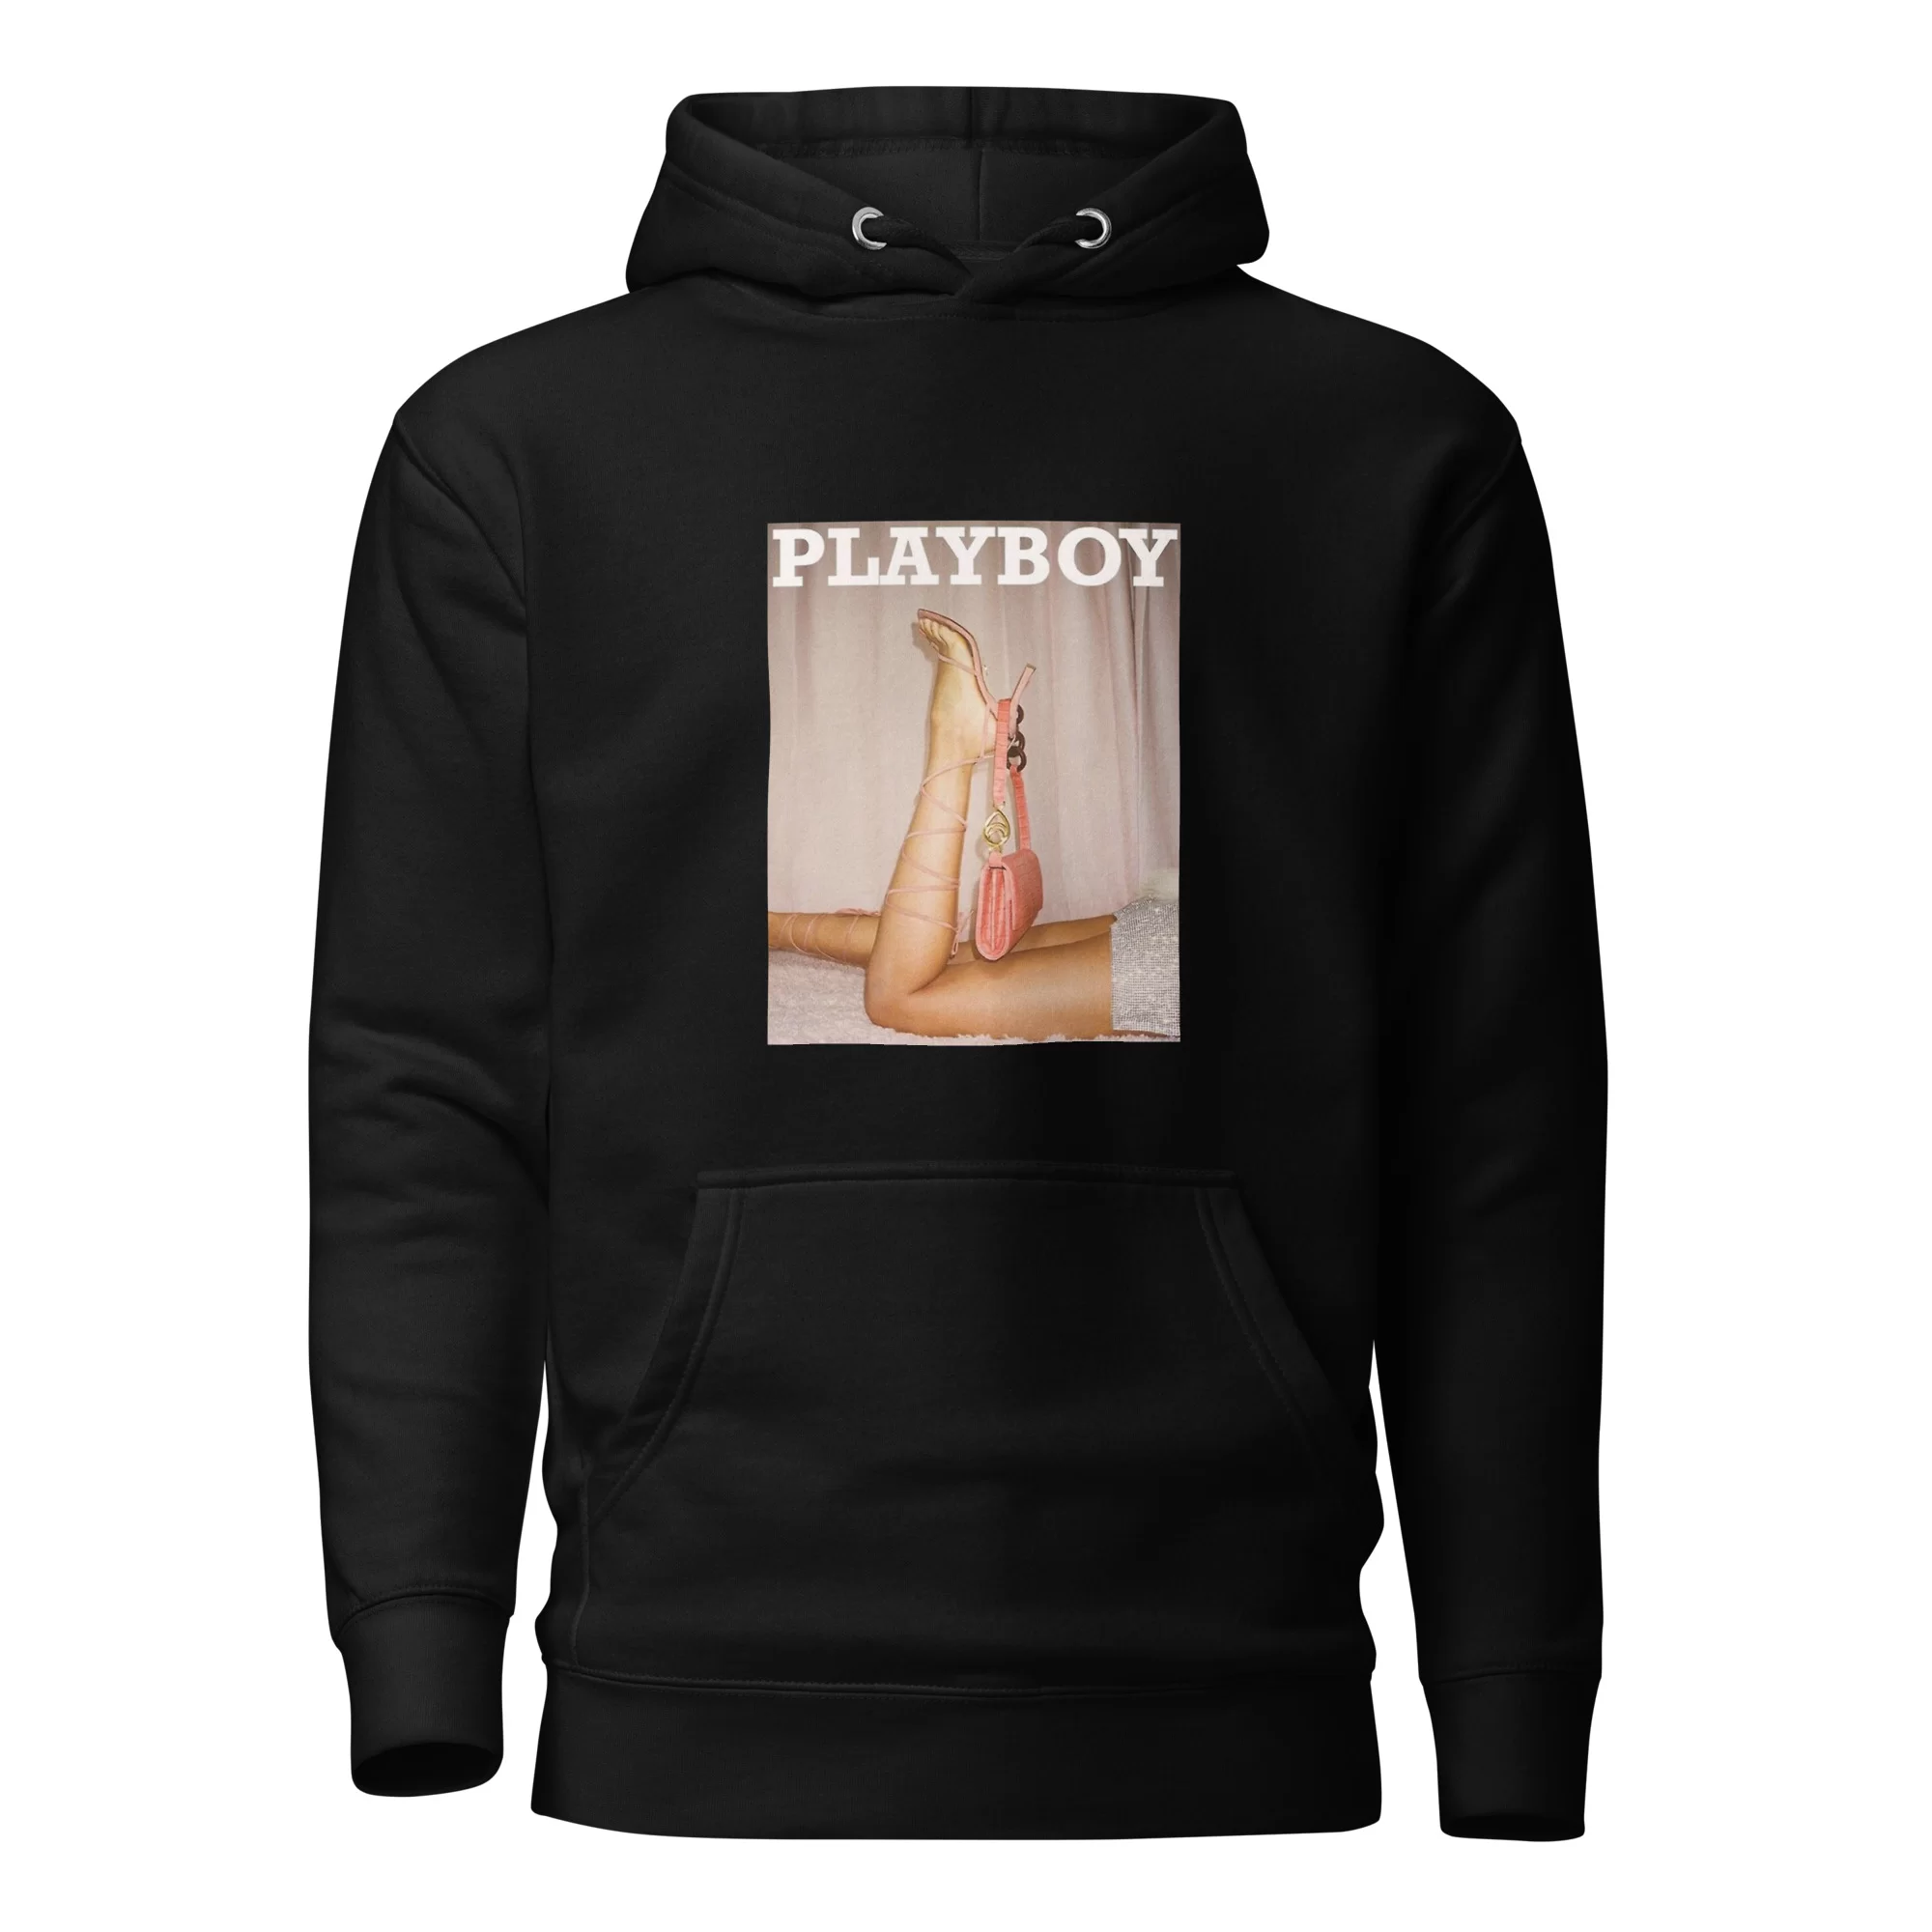 “Playboy Hoodie: A Stylish and Iconic Piece of Clothing”